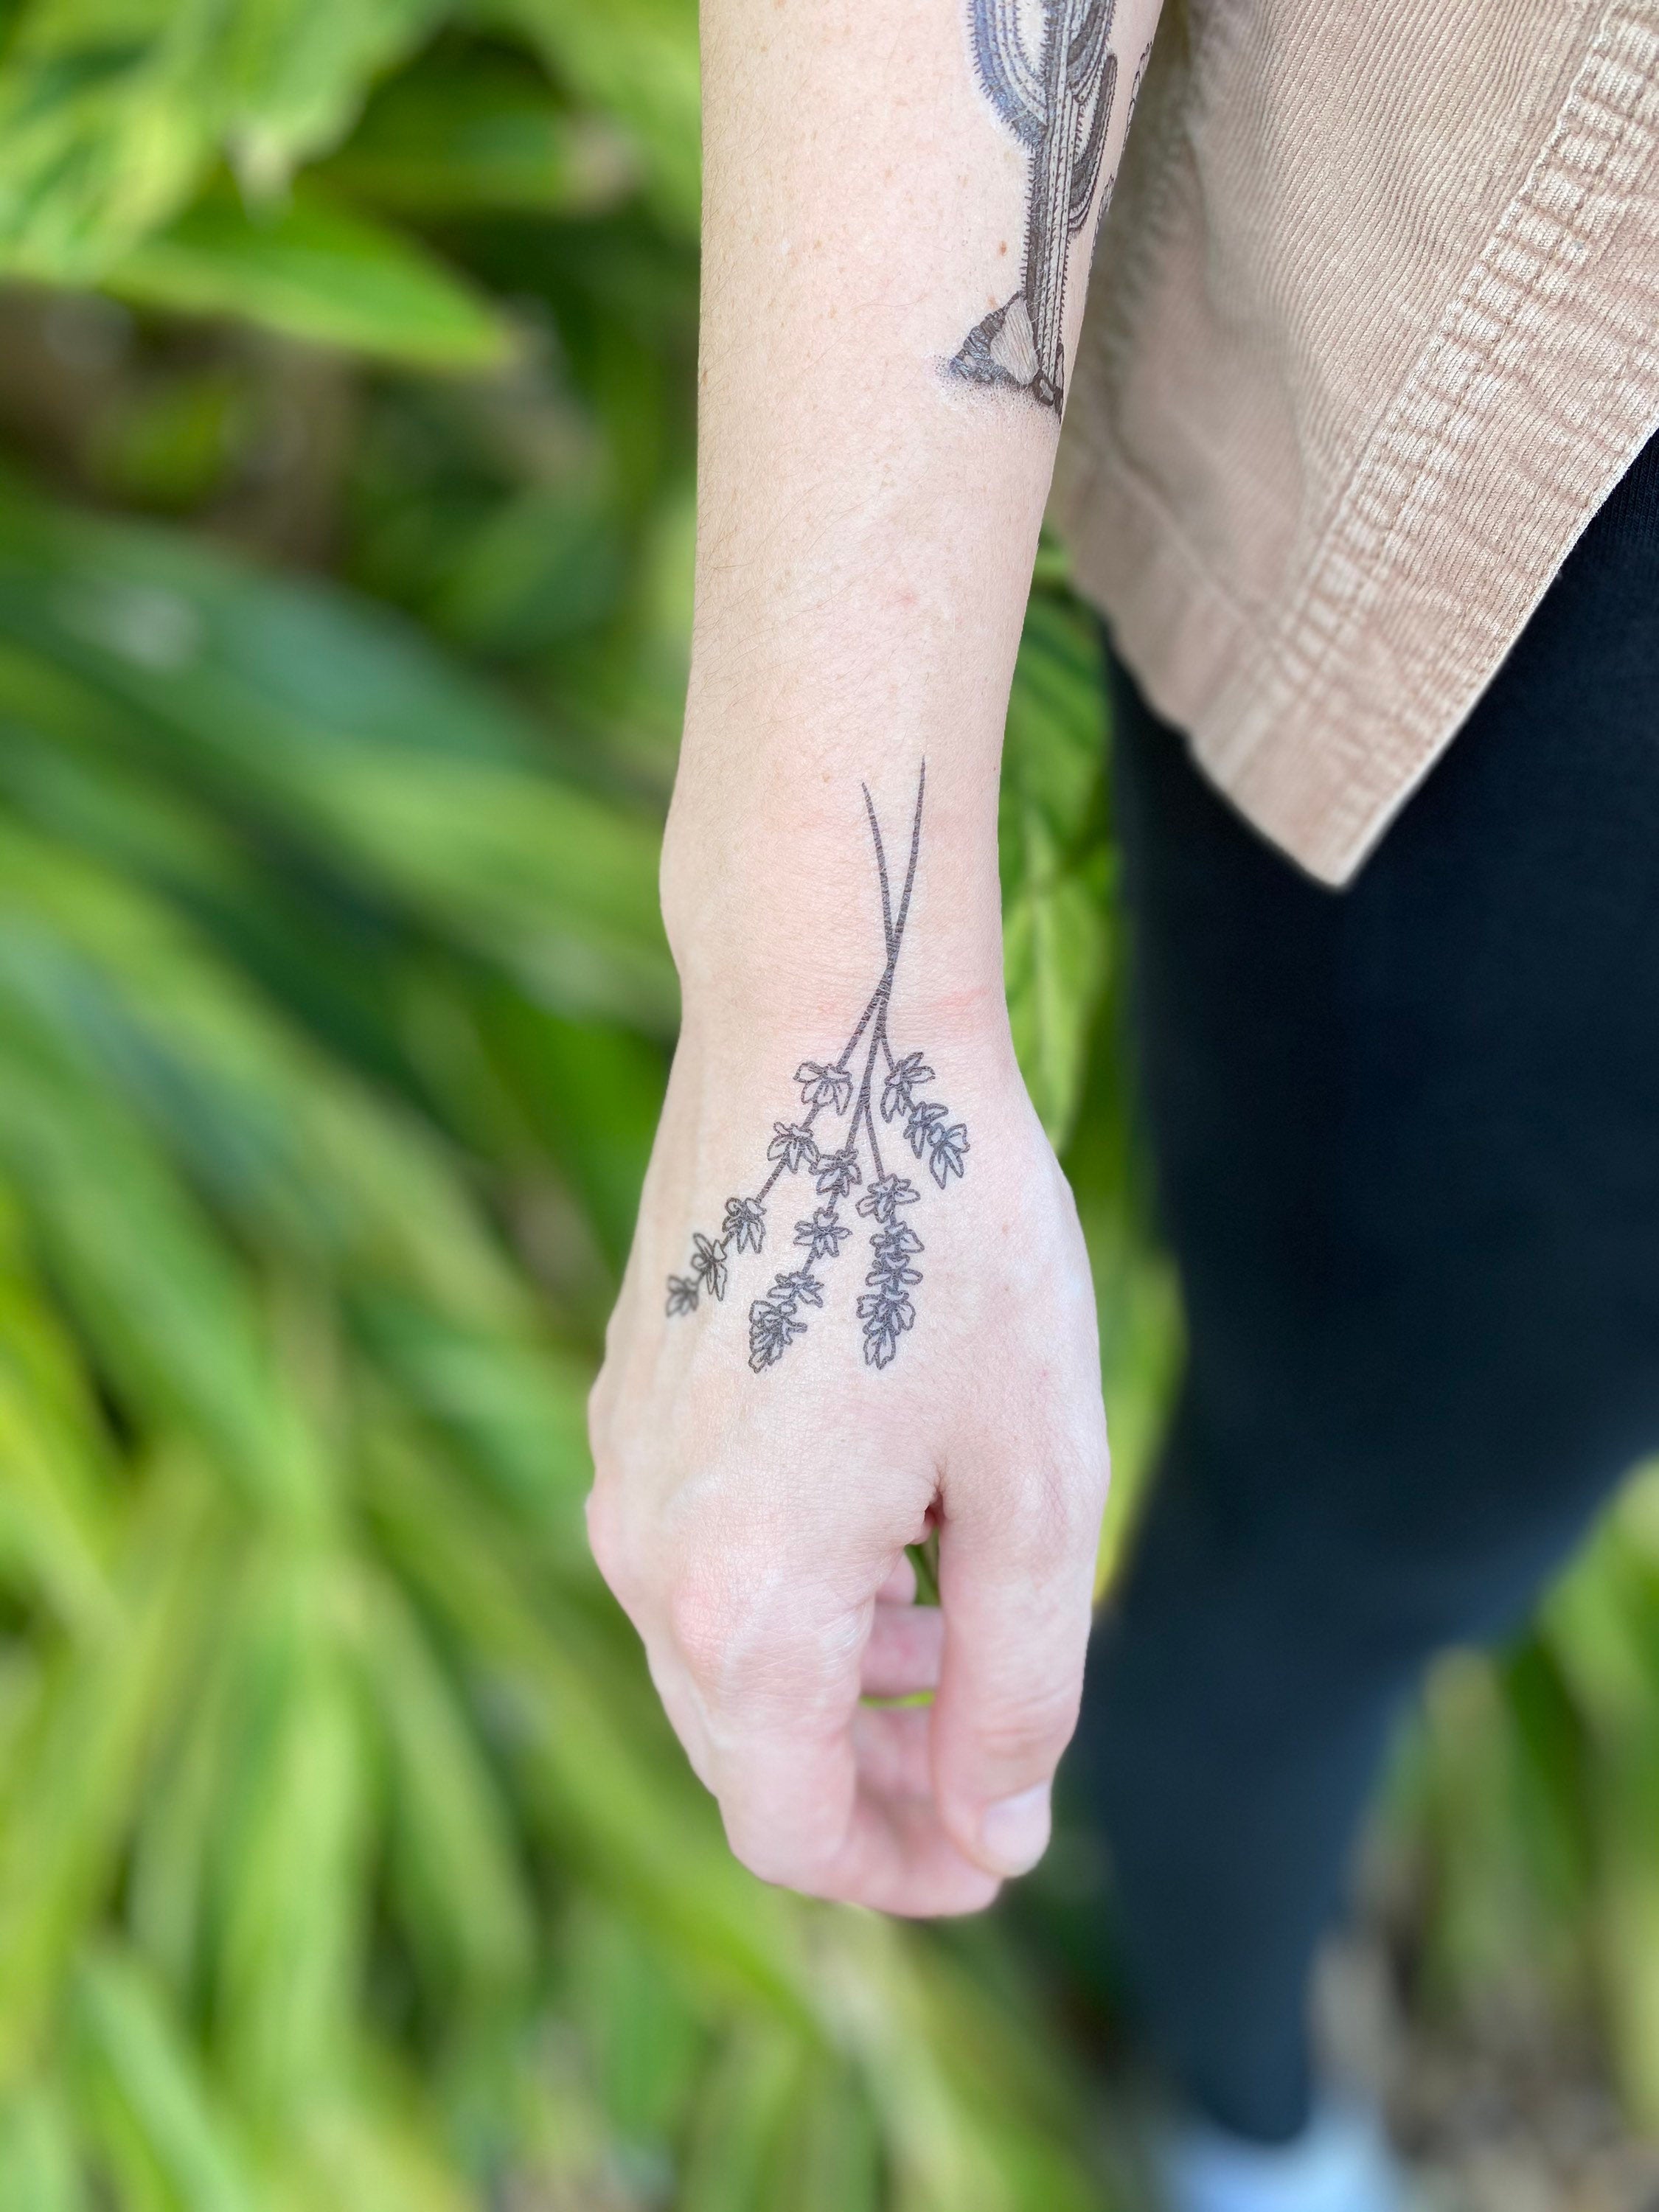 Lavender Tattoo Meaning 7 Symbolisms and Significances